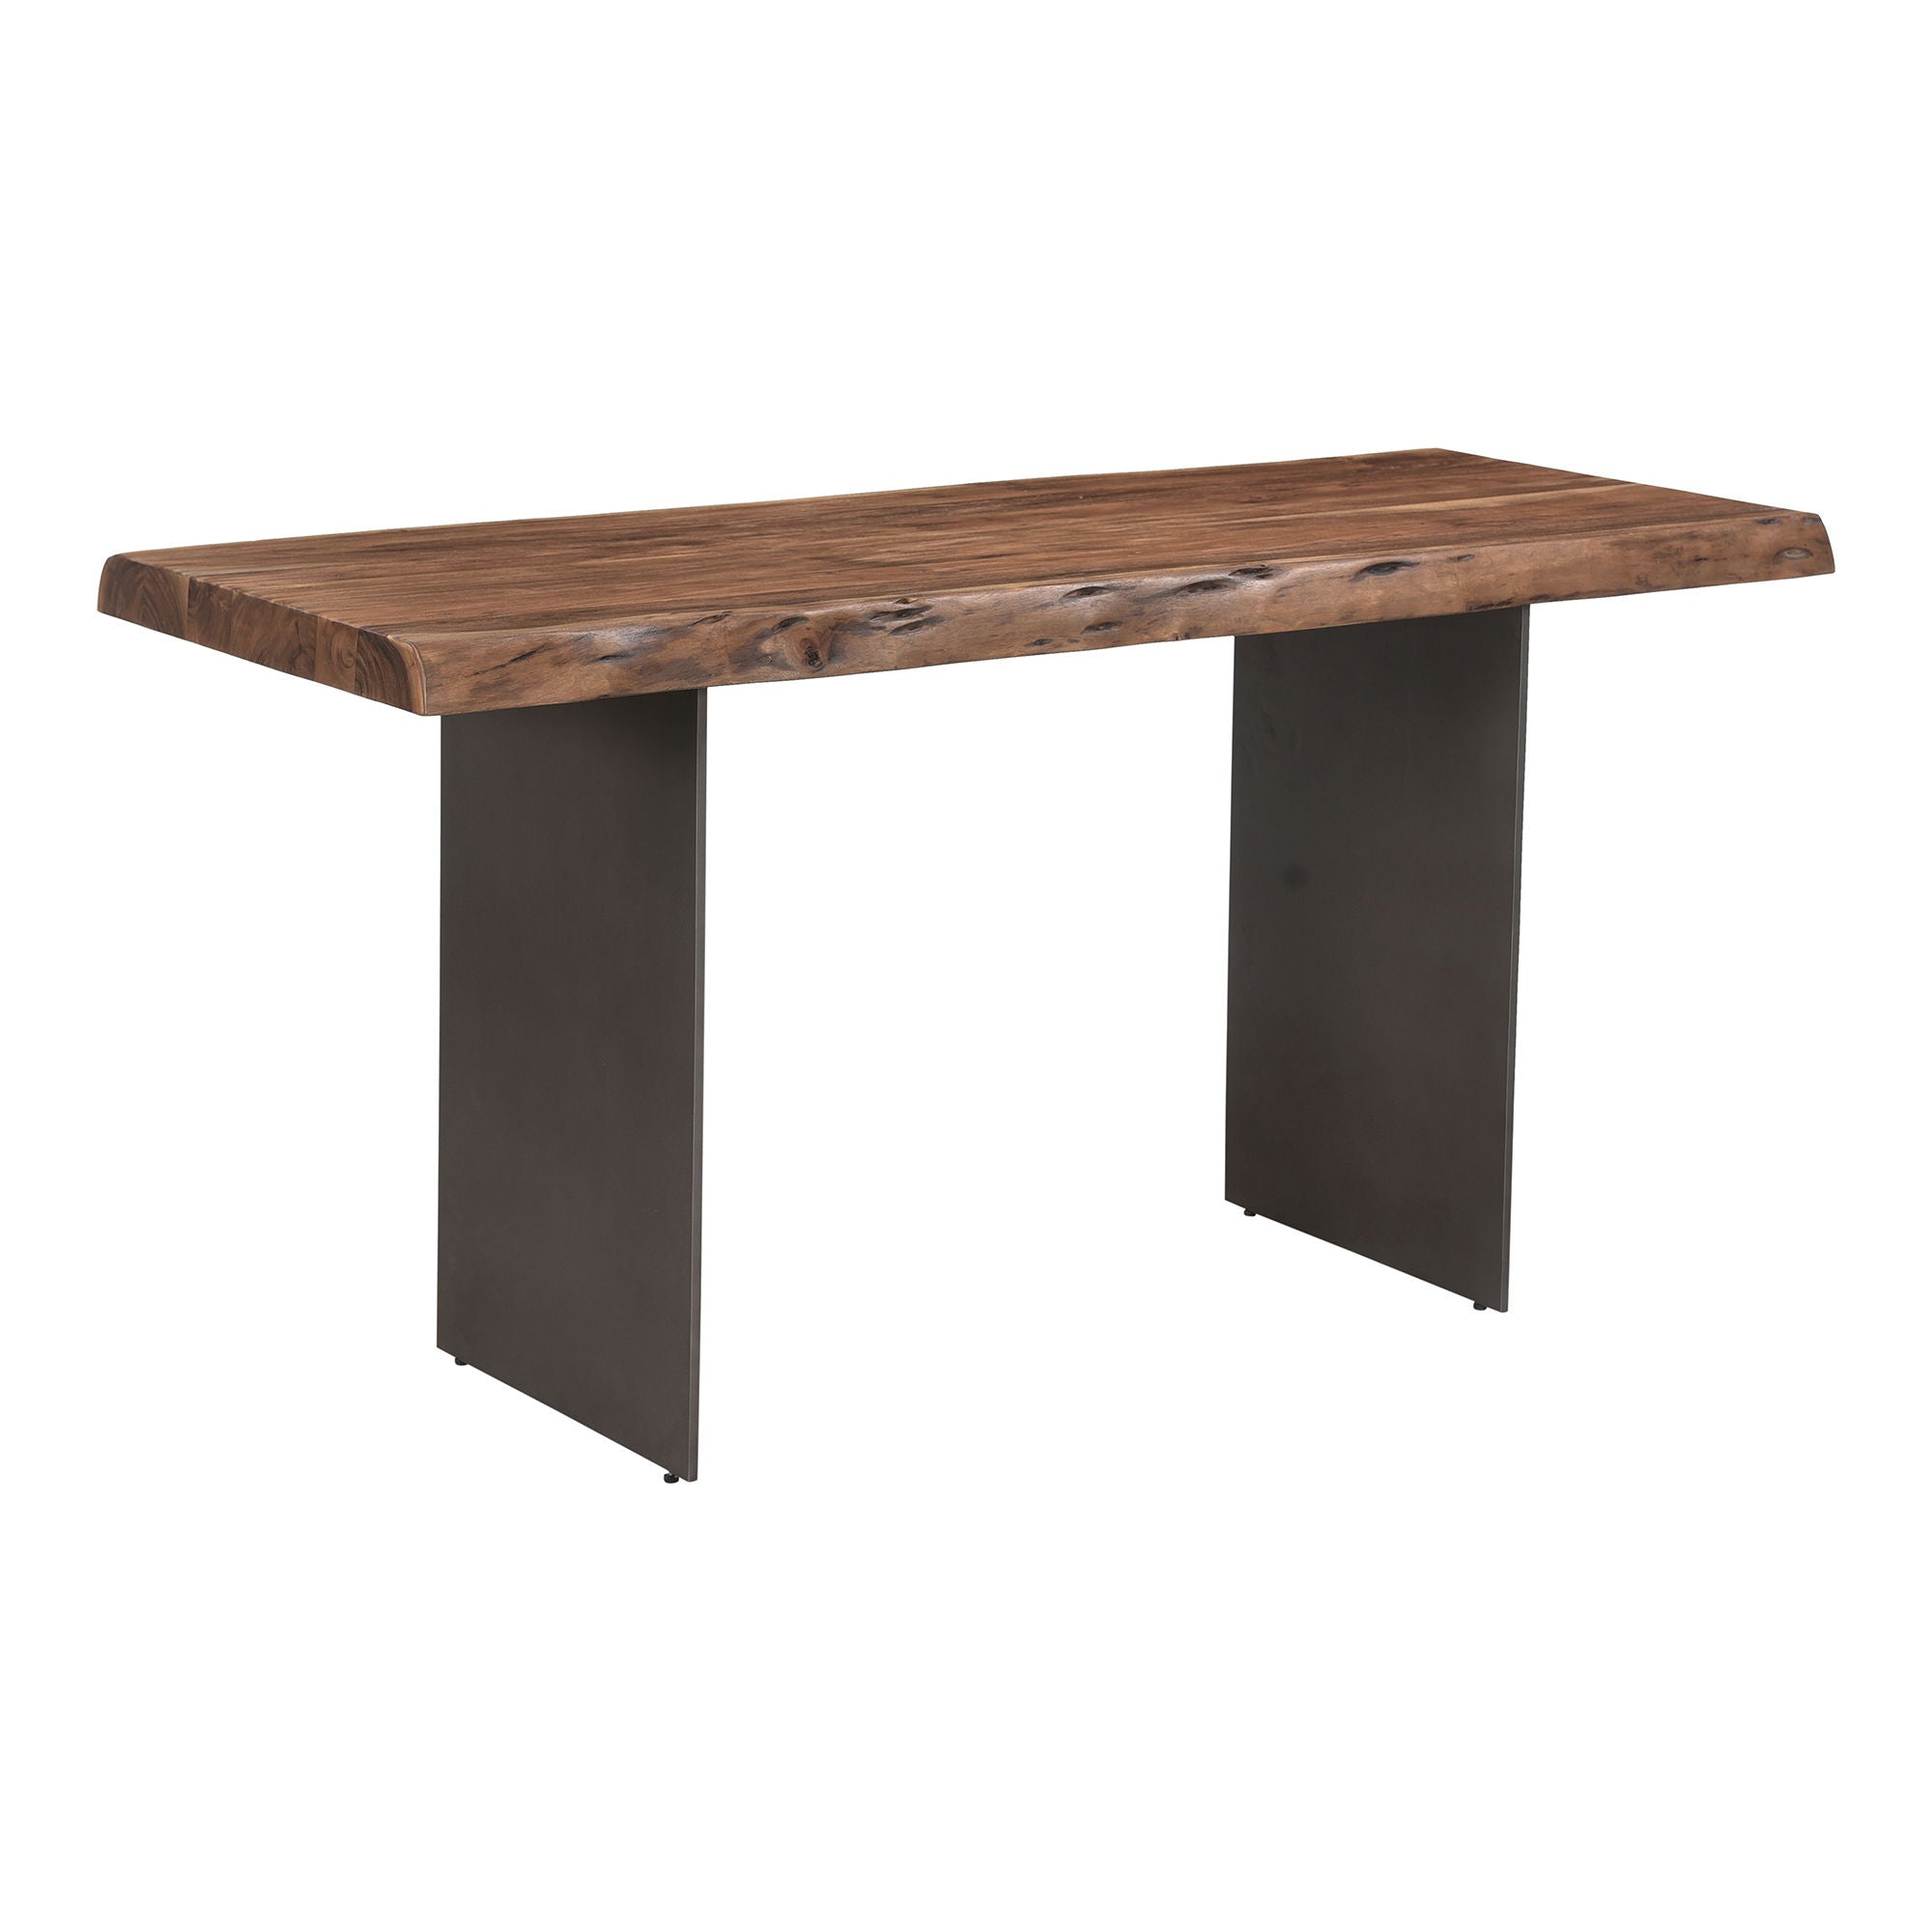 Howell - Desk Acacia Wood - Natural Stain